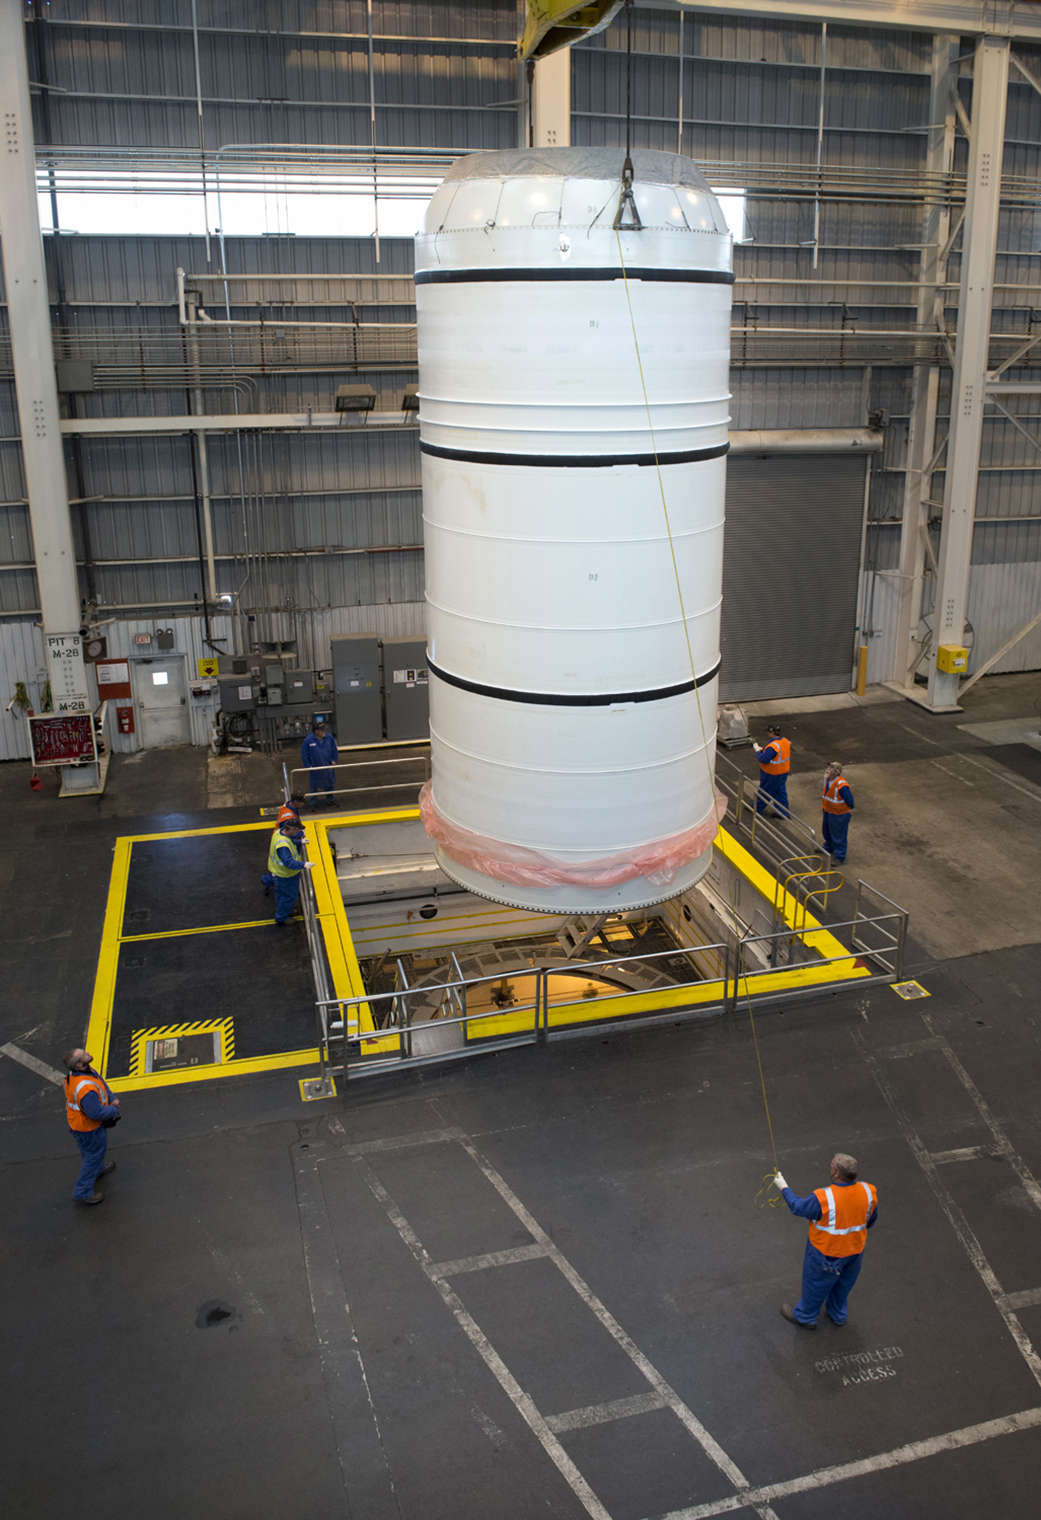 Solid rocket boosters for EM-1 are being cast